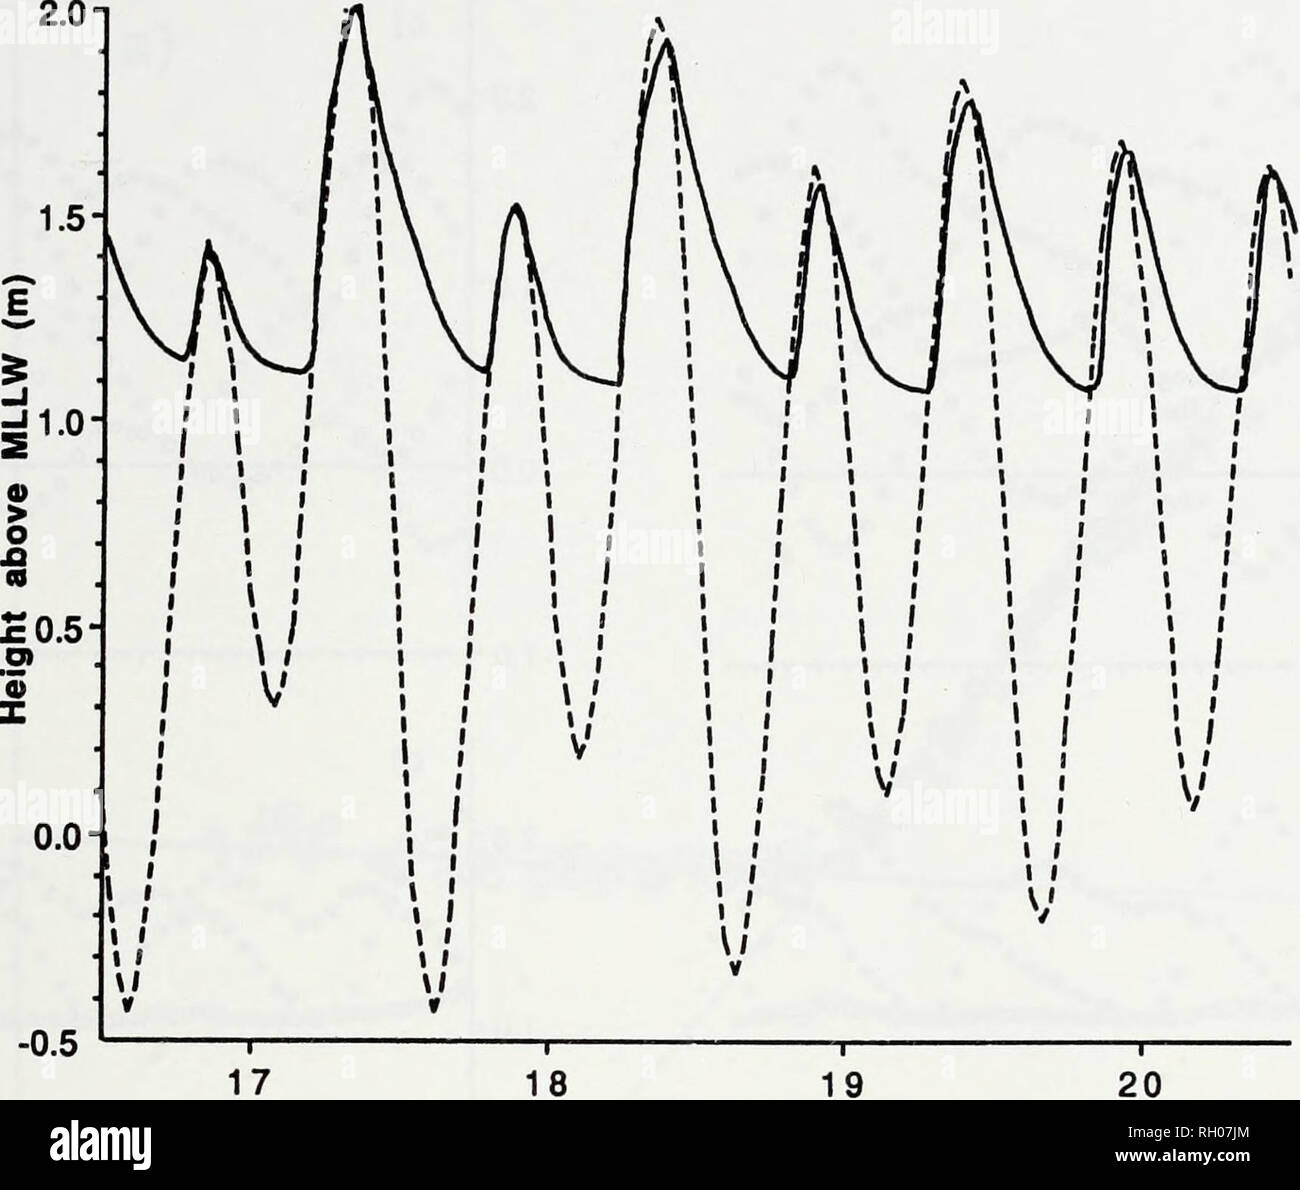 . Bulletin. Science. TIDAL DISTORTION IN CARPINTERIA MARSH 91. February 1992 Fig. 2. Carpinteria Salt Marsh tides (solid line) and predicted tides (dotted line), 16-20 Feb 1992. High tide levels in CSM were similar to those of predicted tides (Figs. 2, 3). Mean CSM high tides were 1.44 ± 0.30 m above MLLW (N = 88) in the summer period and 1.56 ± 0.23 m (N = 88) in the winter period. Mean predicted high tides for the same periods were 1.49 ± 0.35 m above MLLW and 1.42 ± 0.28 m. High tide levels in CSM were positively correlated with predicted high tide levels in both periods (Fig. 4). The relat Stock Photo